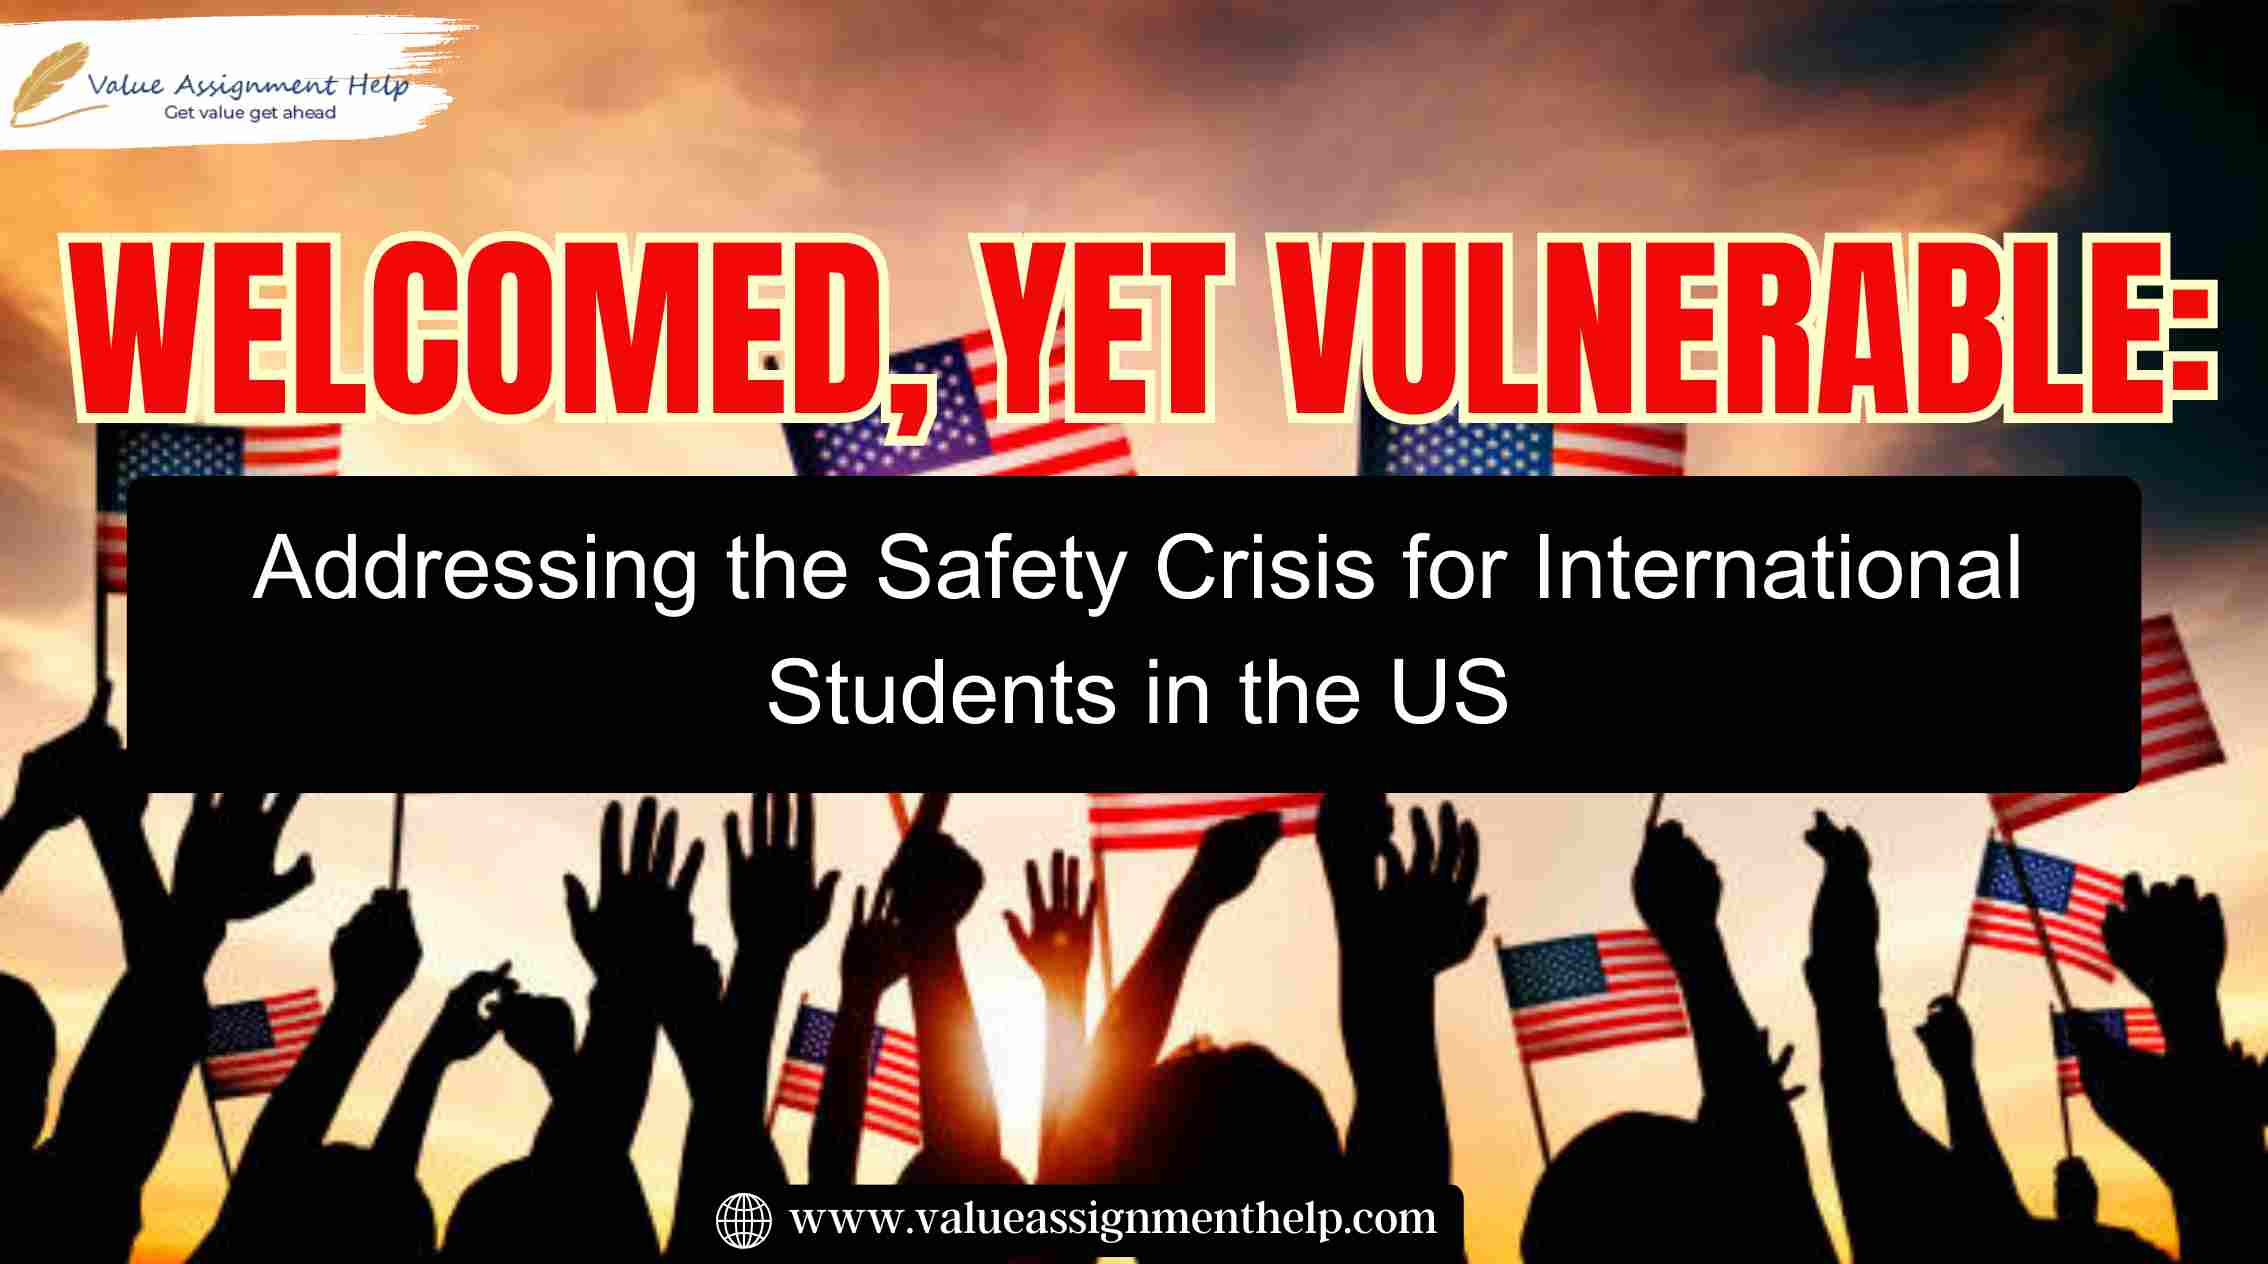  Welcomed, Yet Vulnerable: Addressing the Safety Crisis for International Students in the US